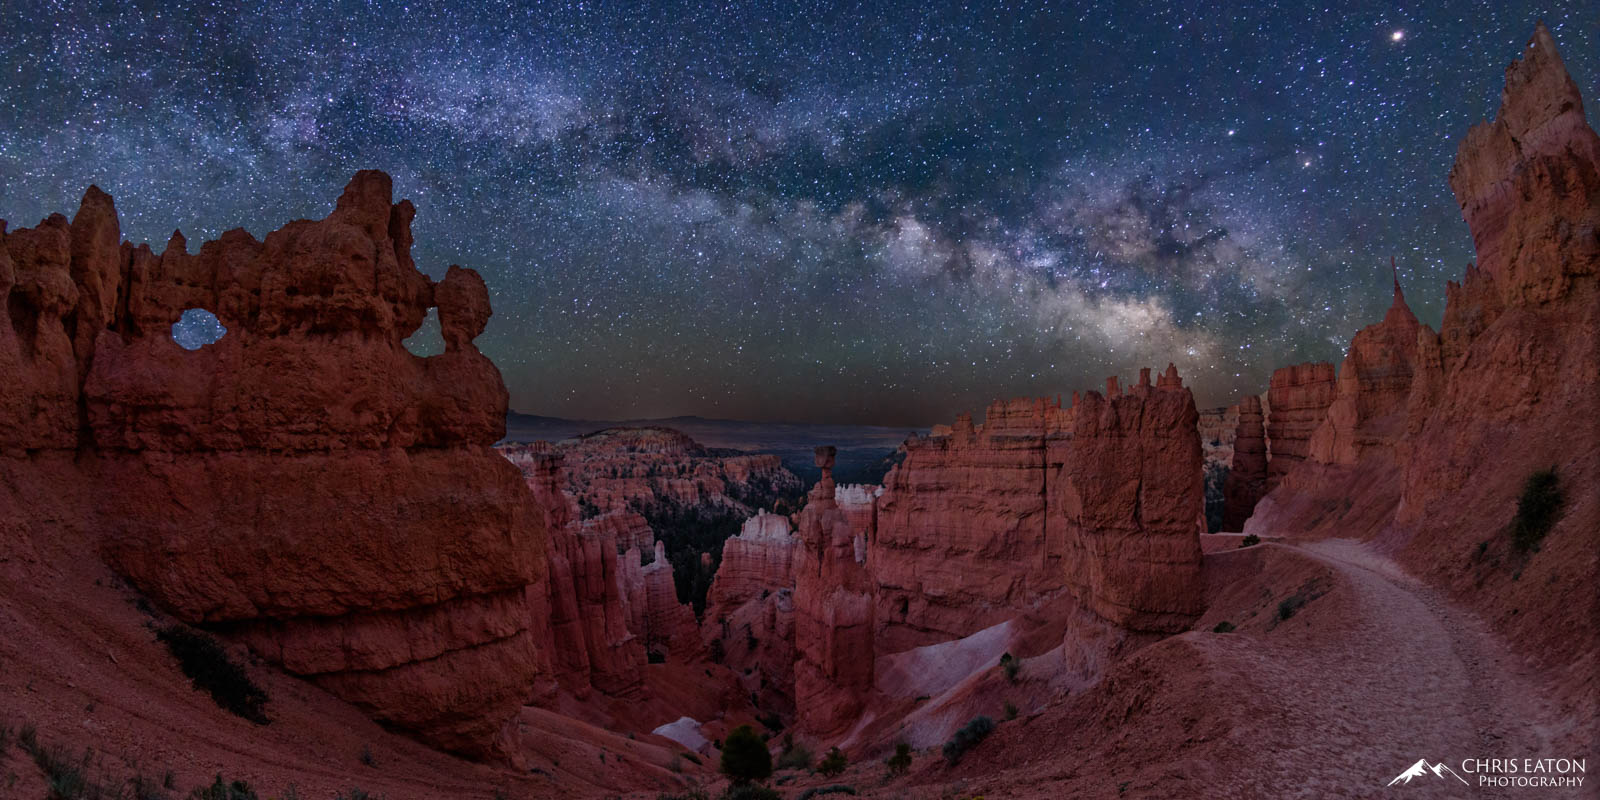 Our Milky Way galaxy arches over the Navajo Loop Trail in the amphitheater of Bryce Canyon National Park.